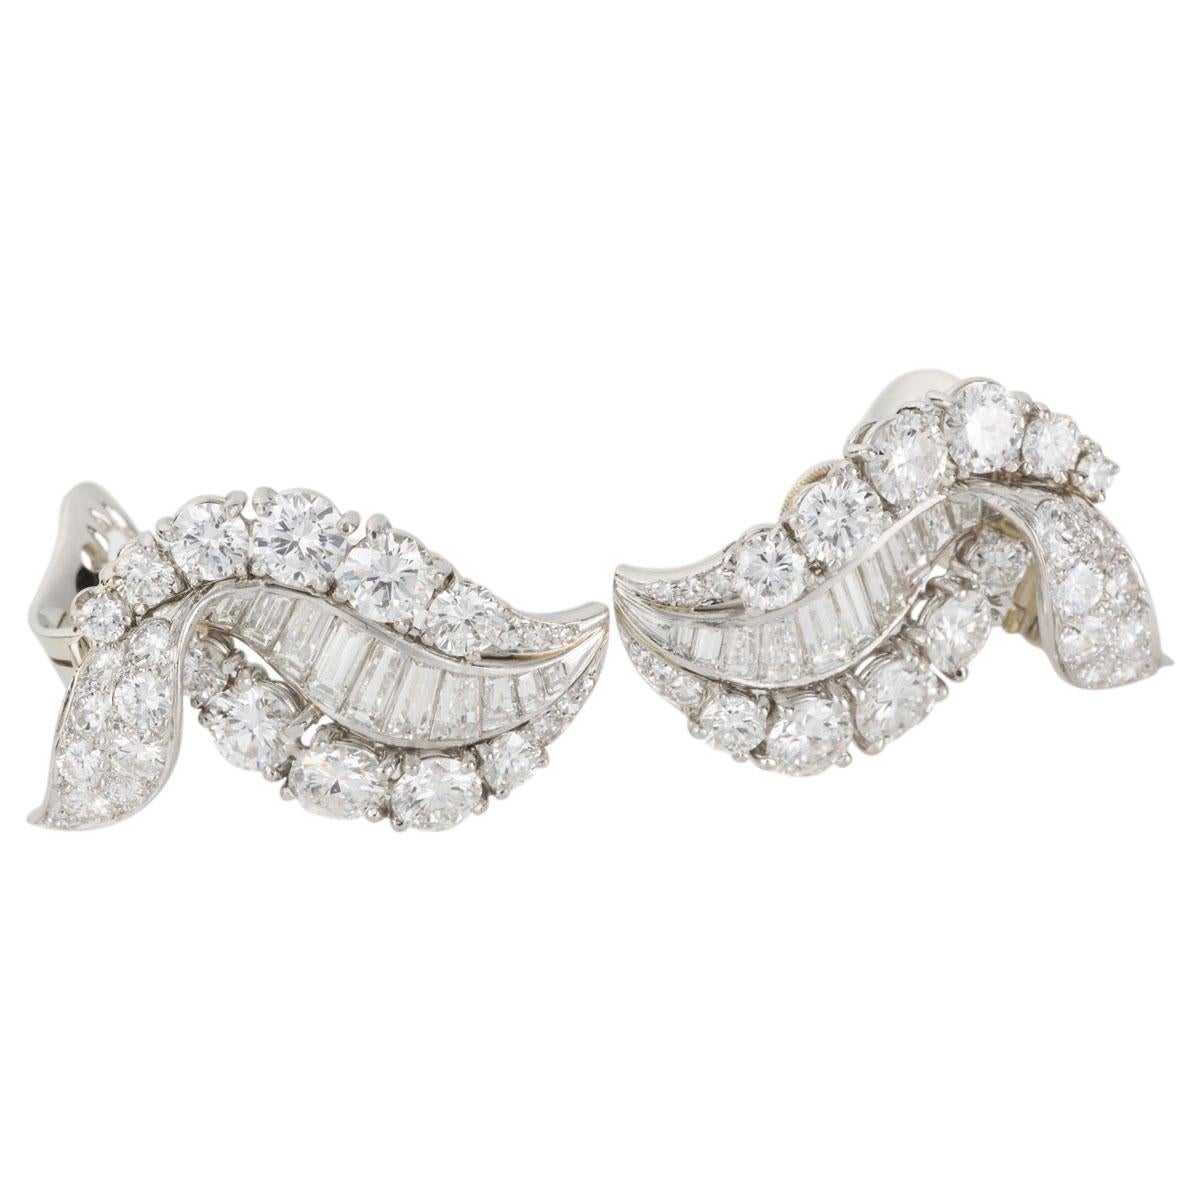 Contemporary 11.00 Carat Diamond Swirl Cocktail Day Night Ear Clips For Sale